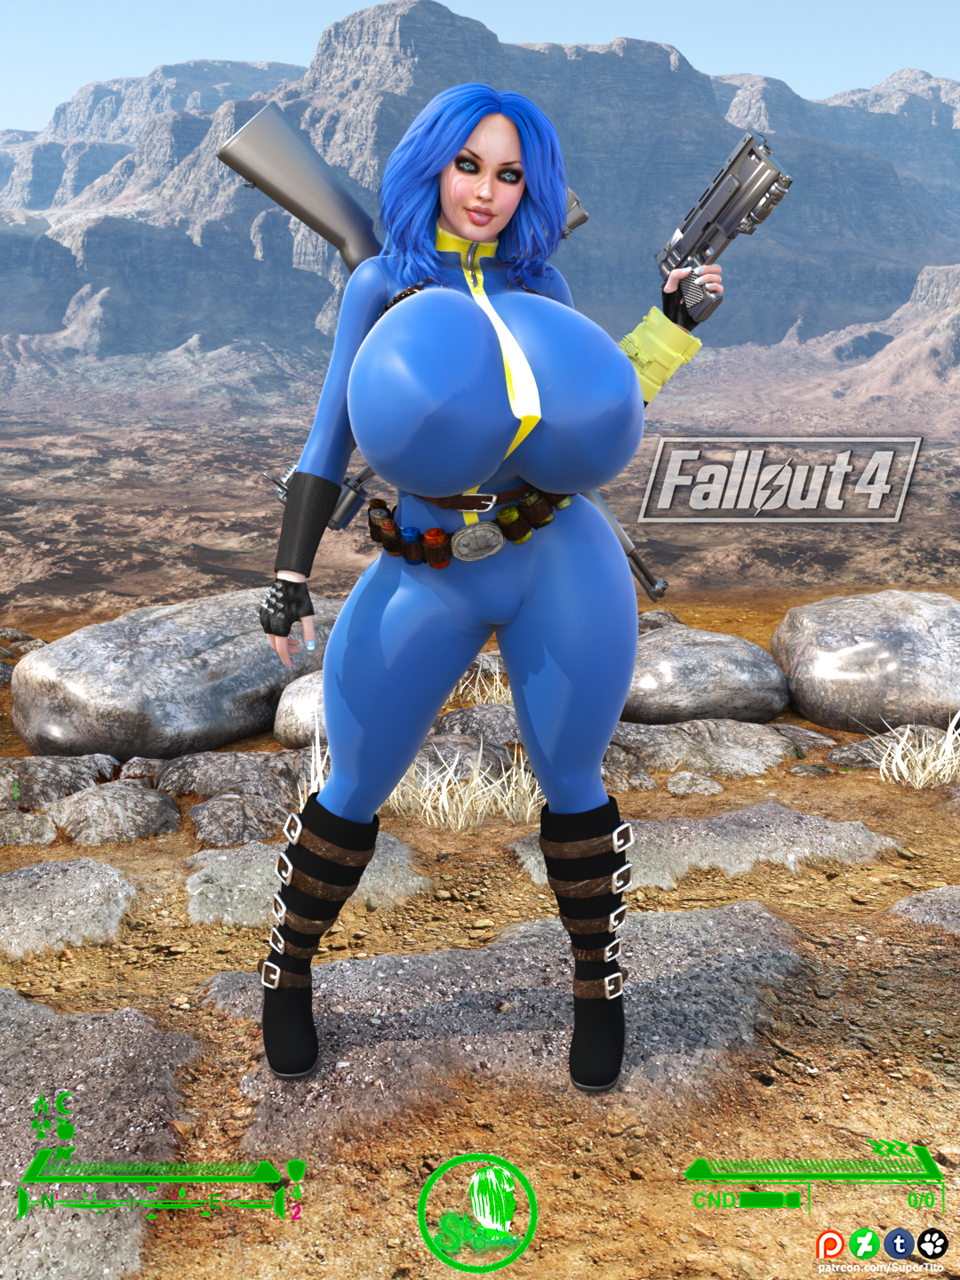 brad storrs recommends Fallout 4 Big Boobs